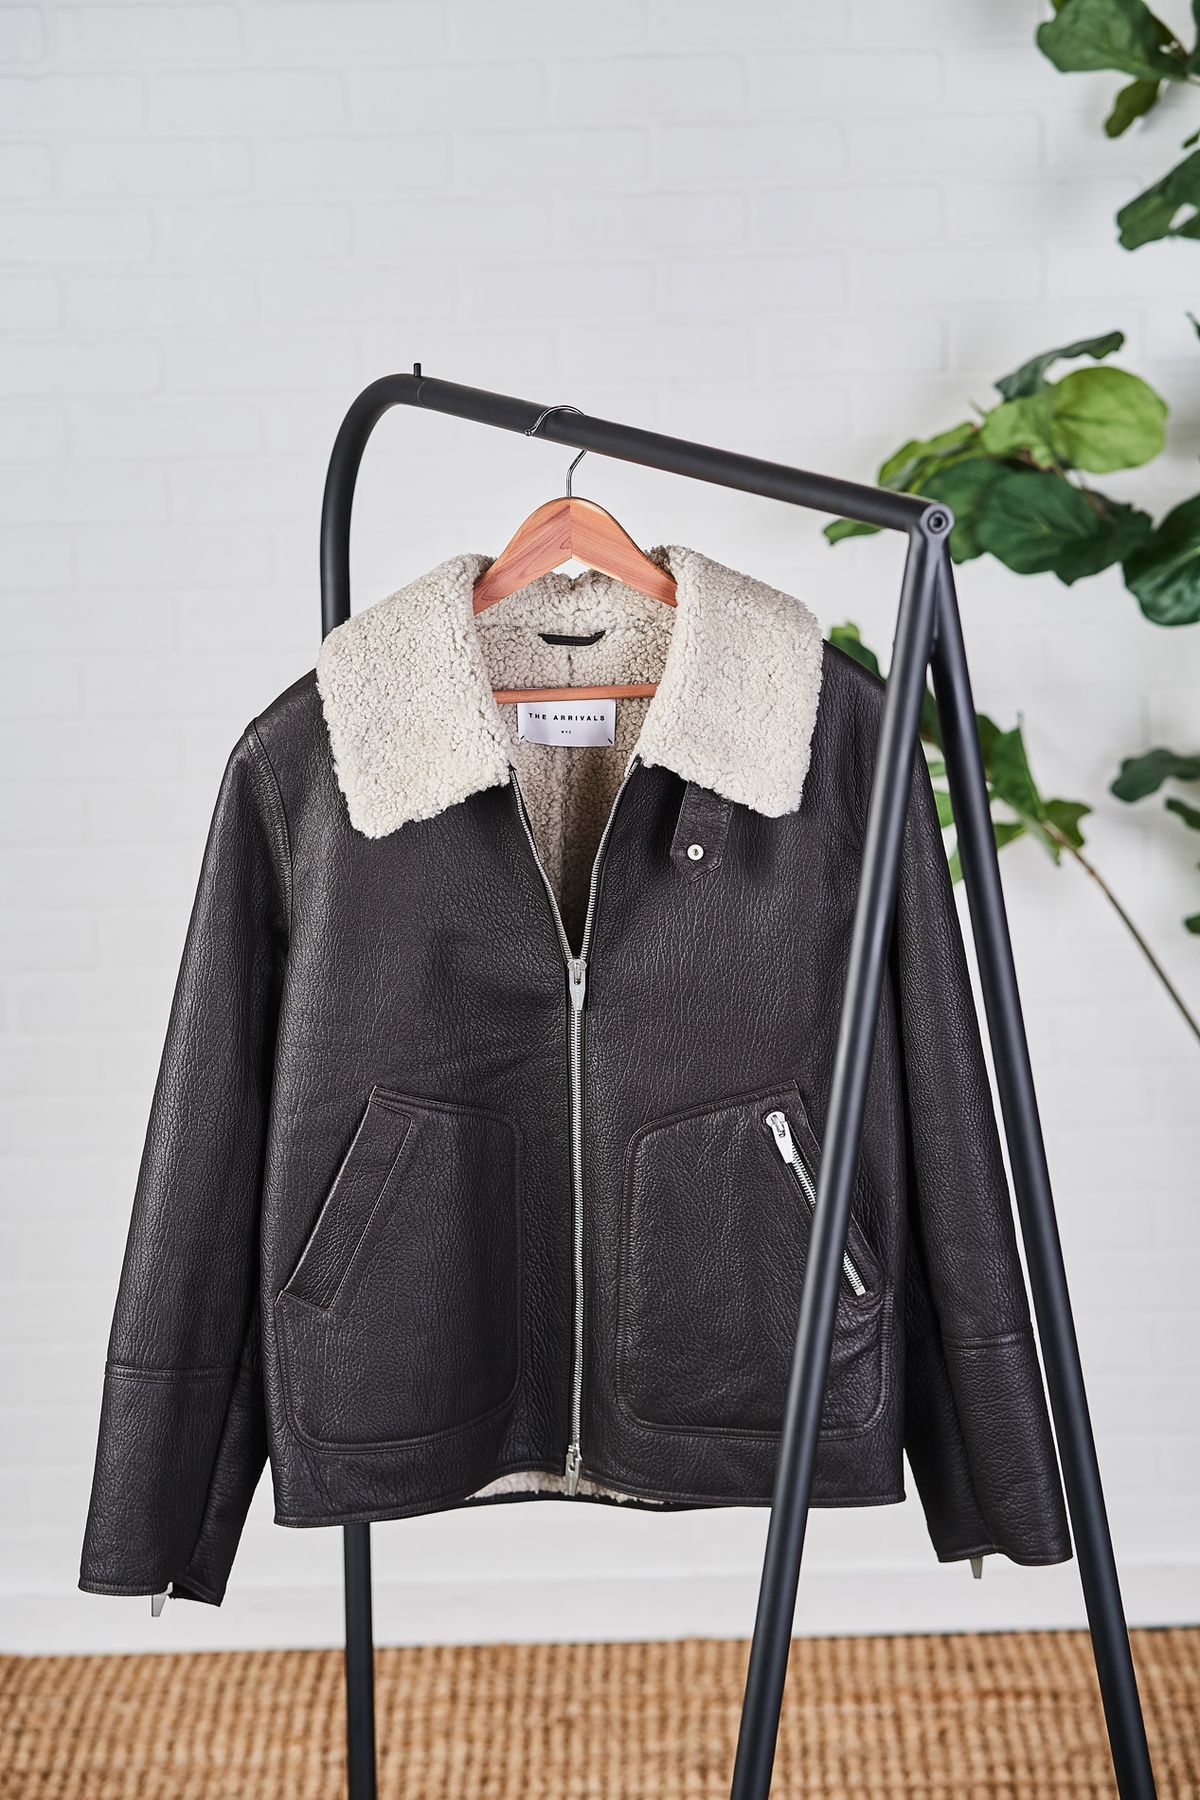 Clothes hanger, Clothing, Outerwear, Jacket, Product, Fur, Leather, Sleeve, Leather jacket, Textile, 